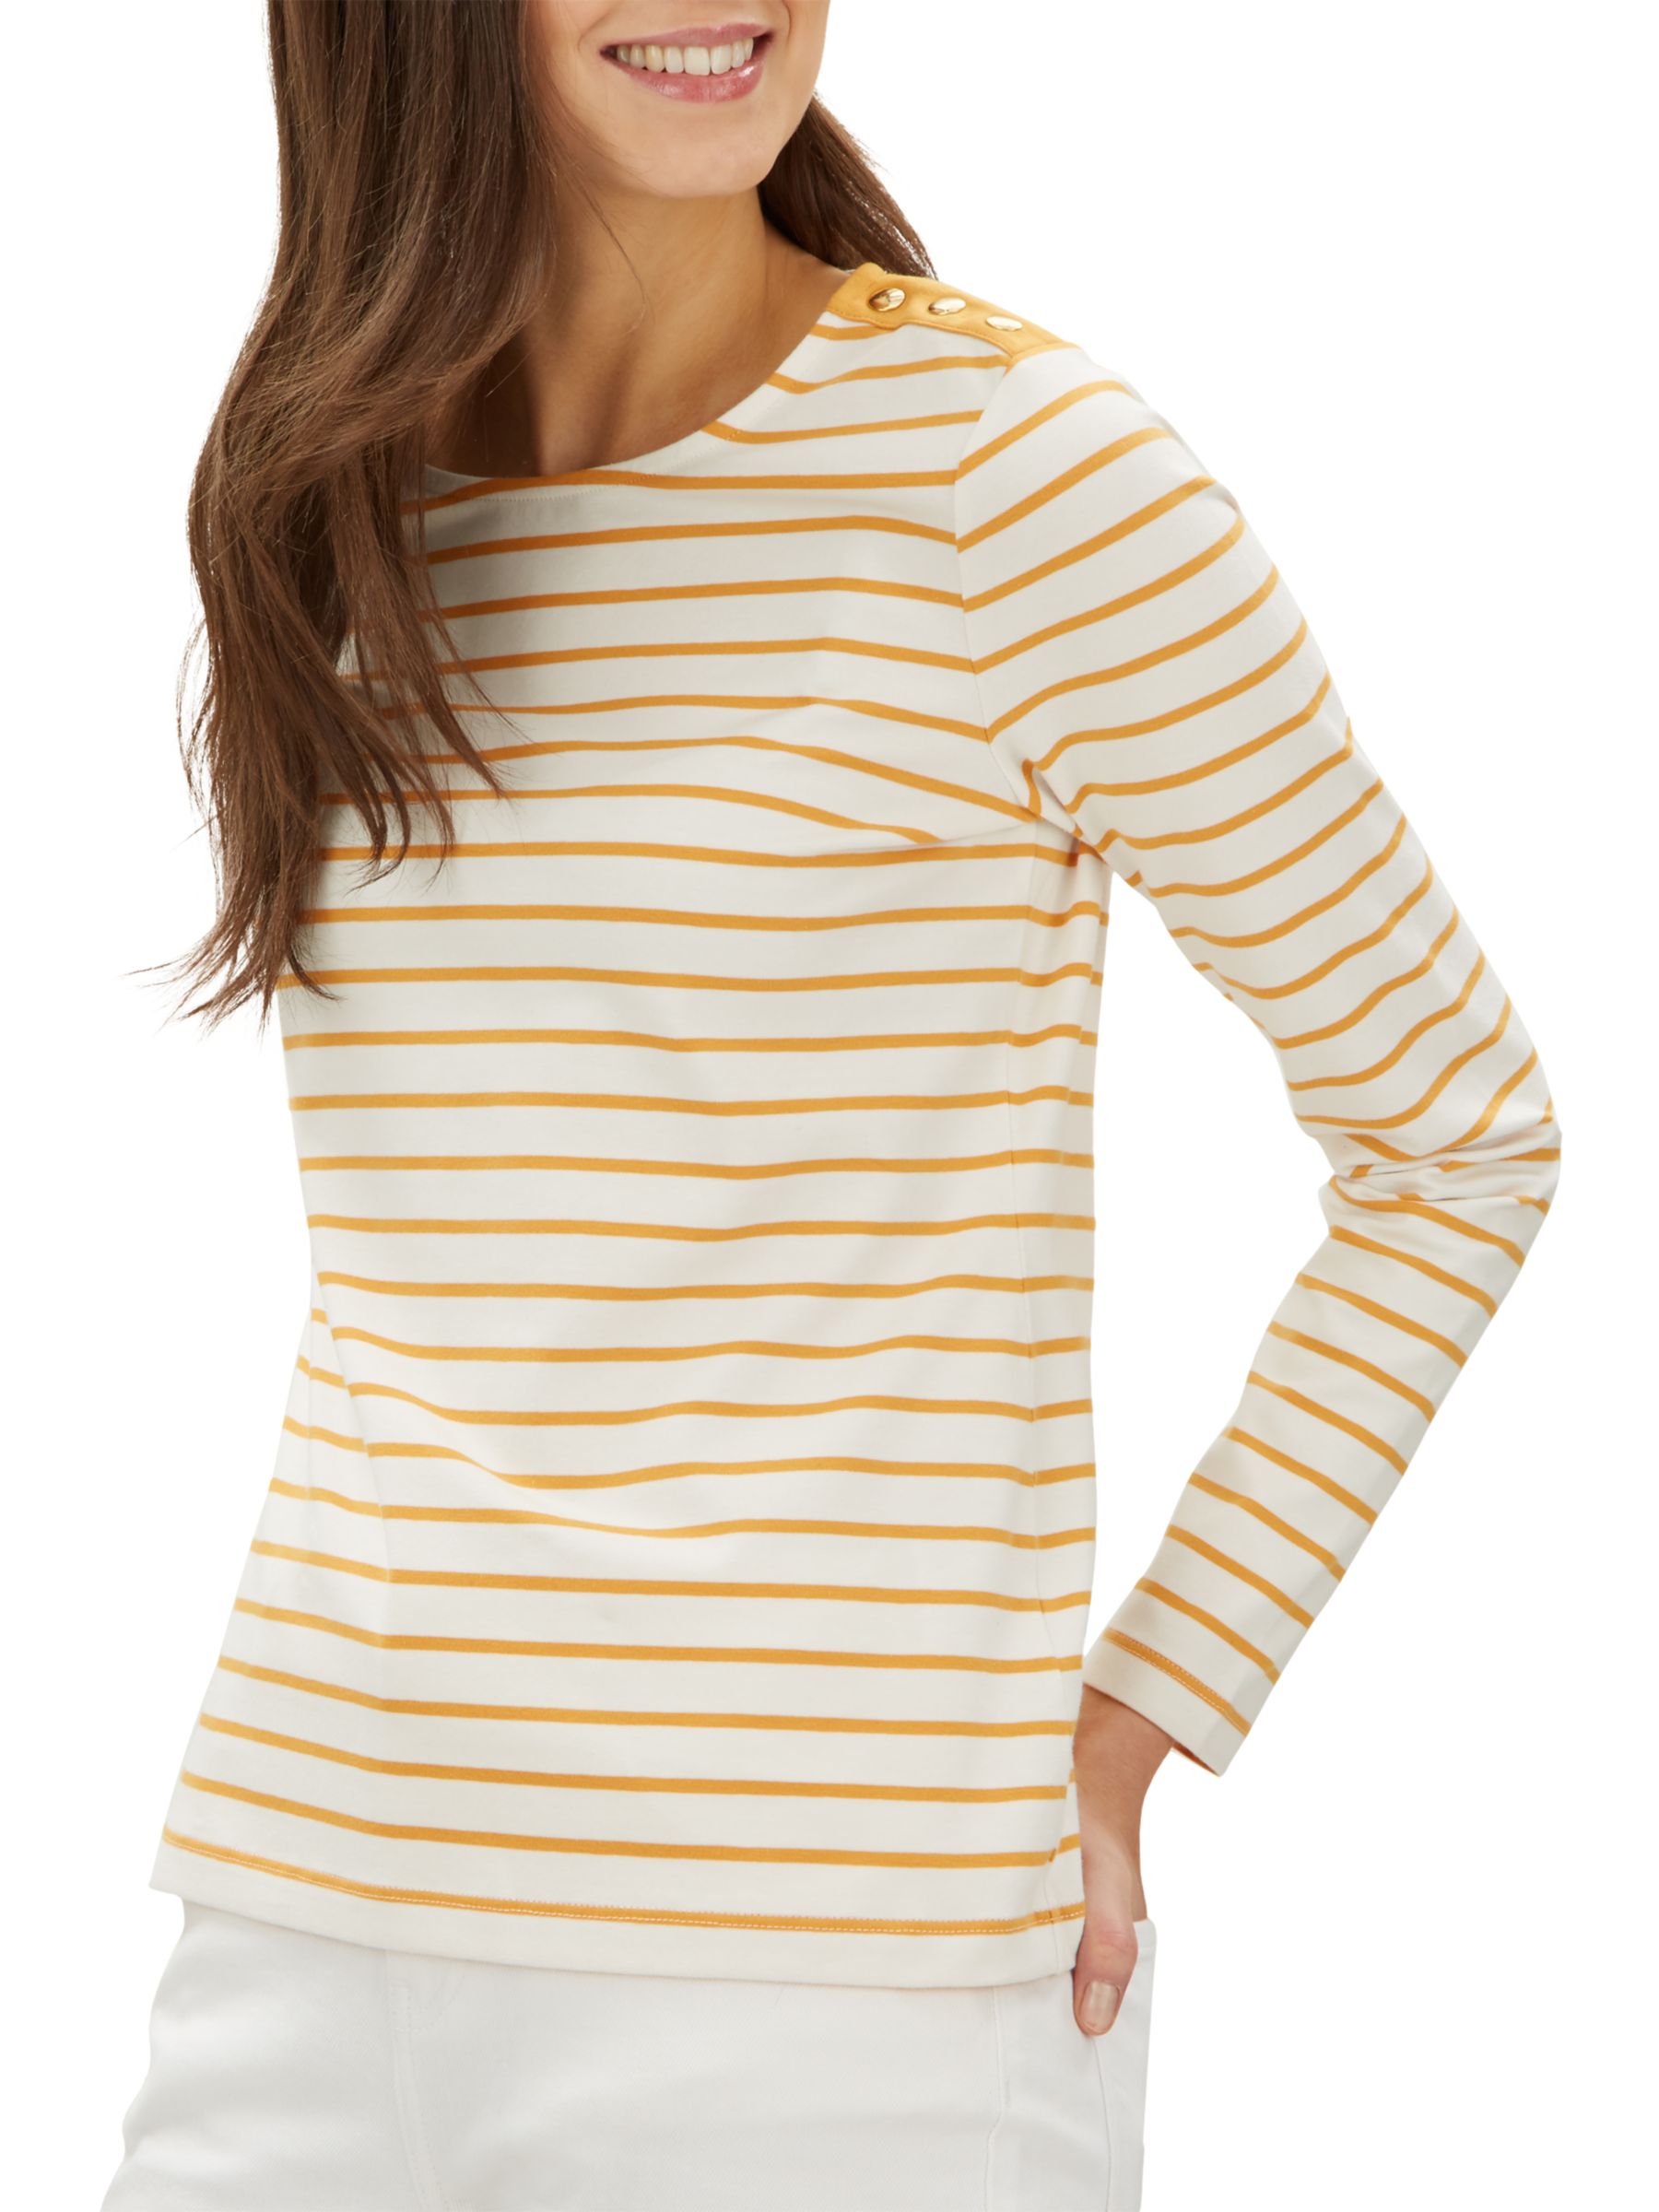 Jaeger Essential Breton Striped Jersey Top, Yellow/Ivory